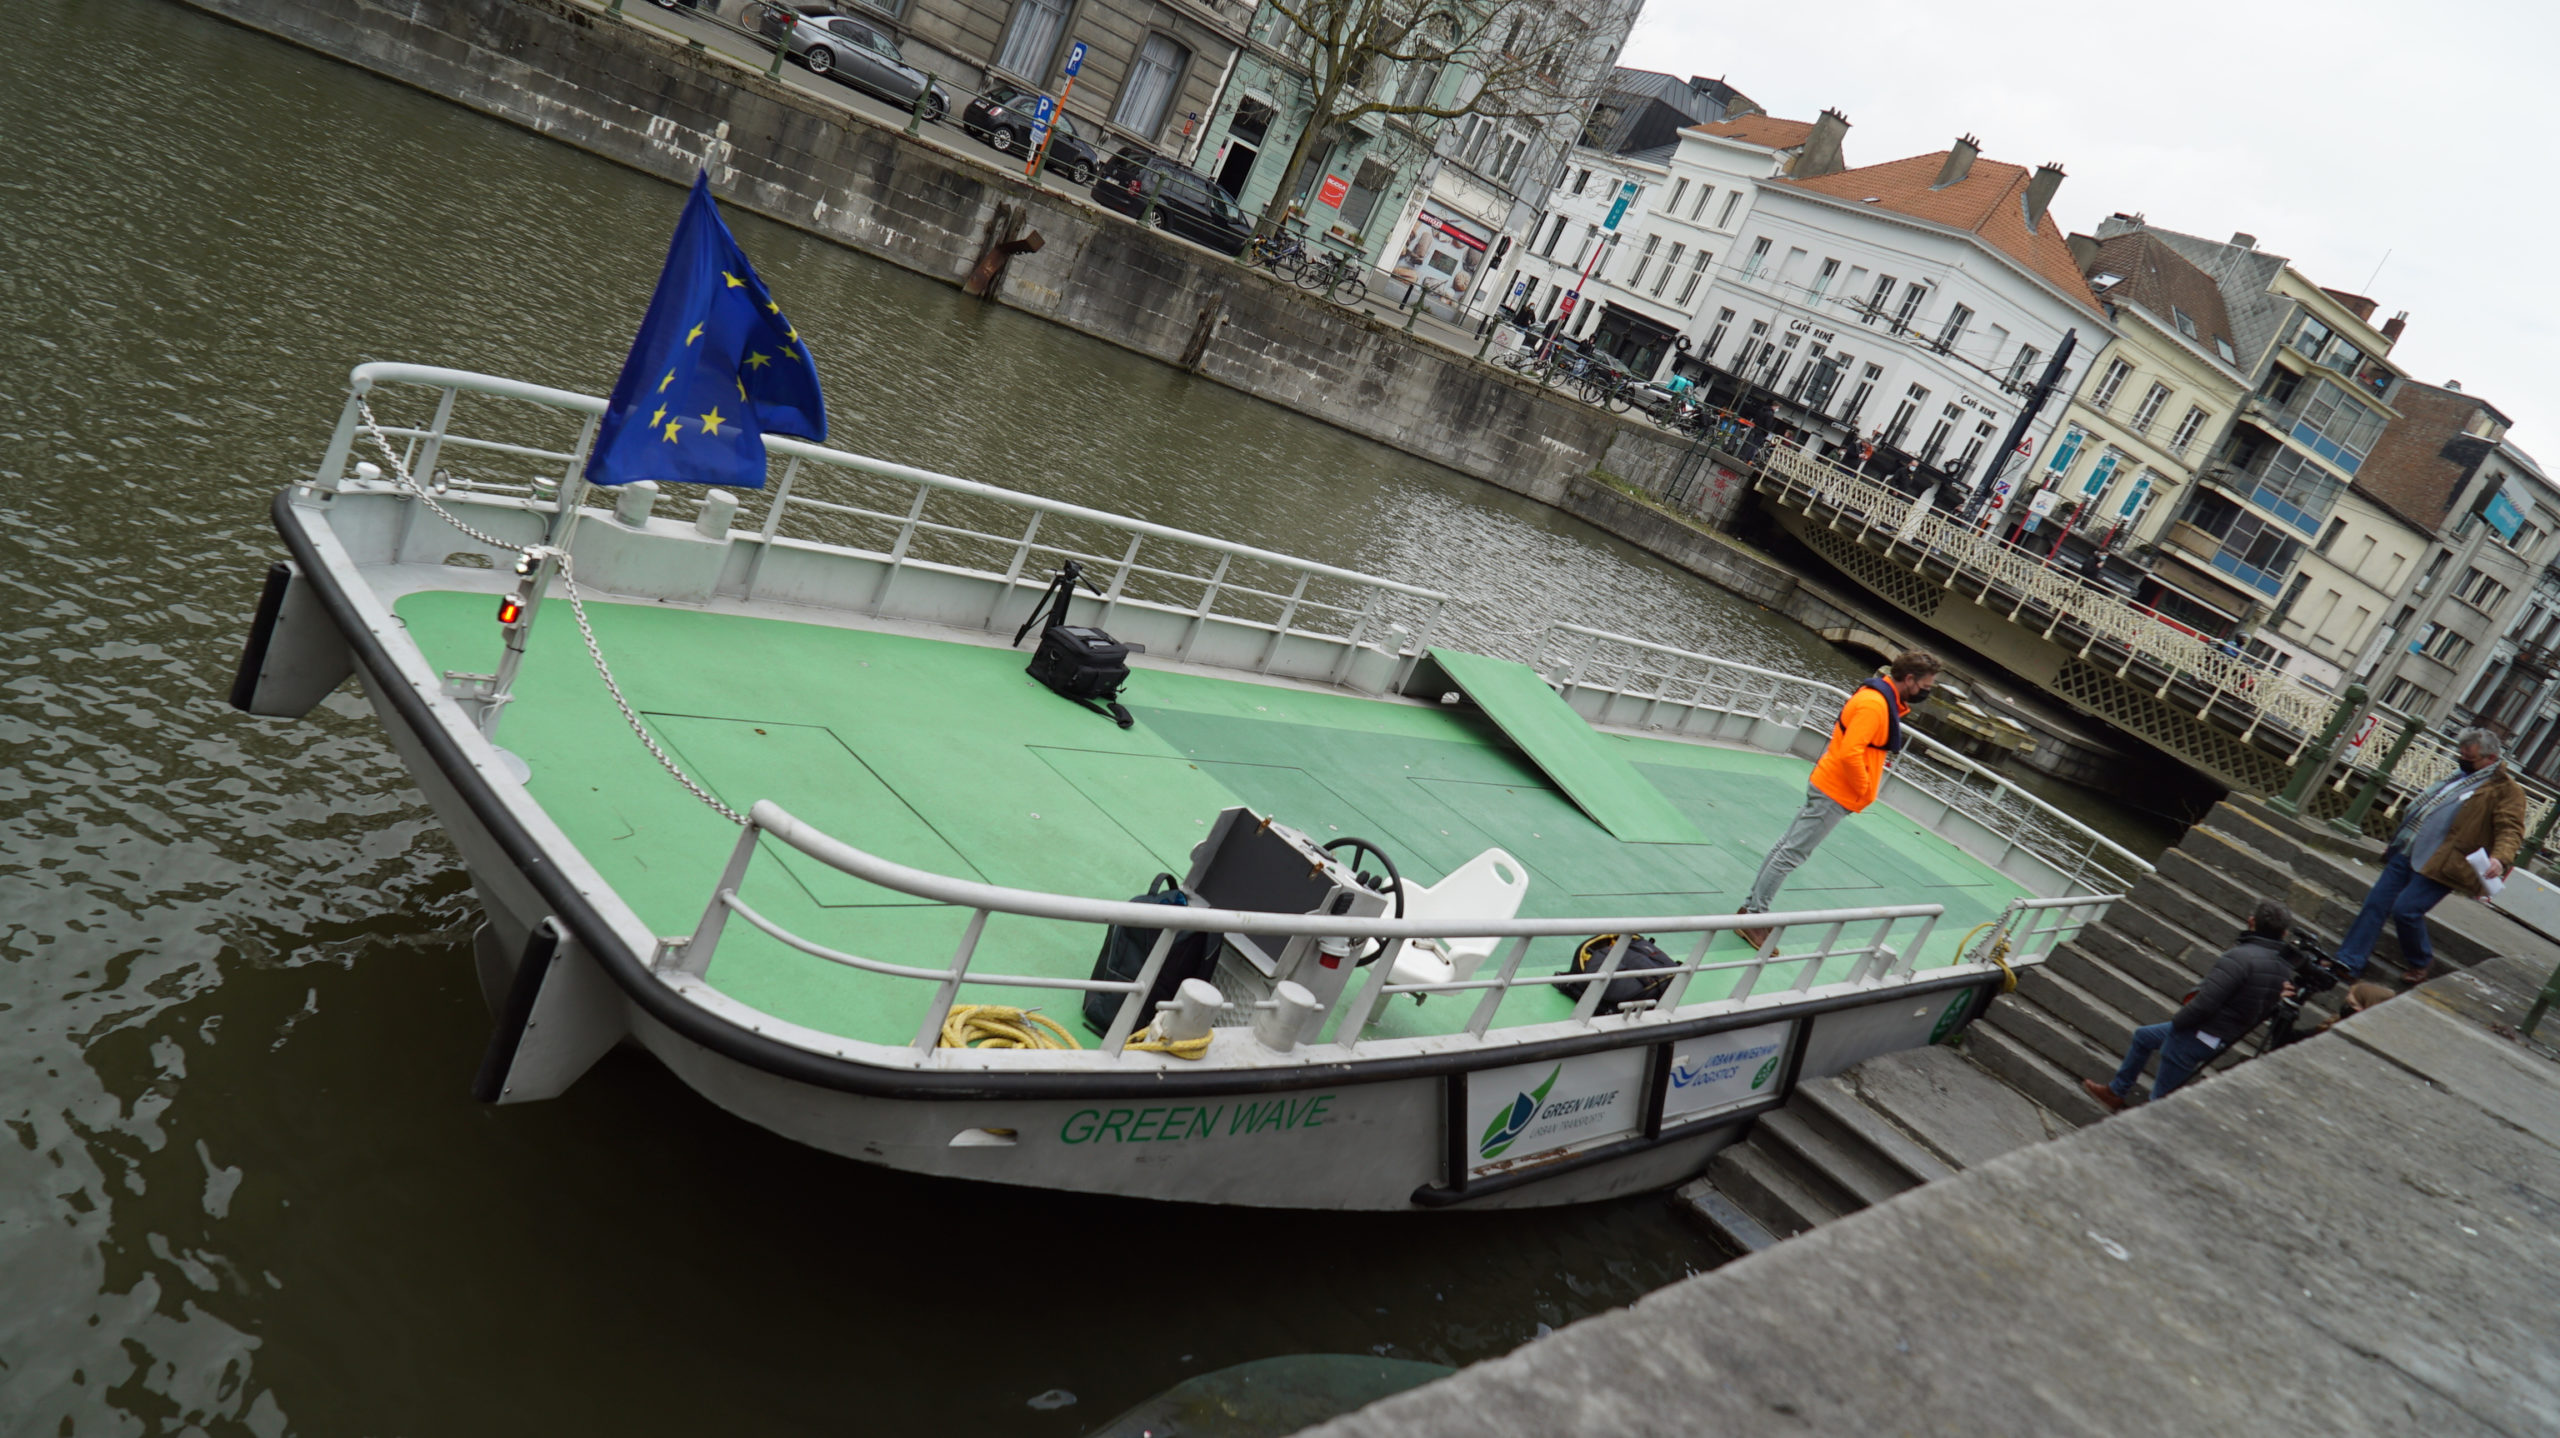 Ghent tests electric building material delivery raft